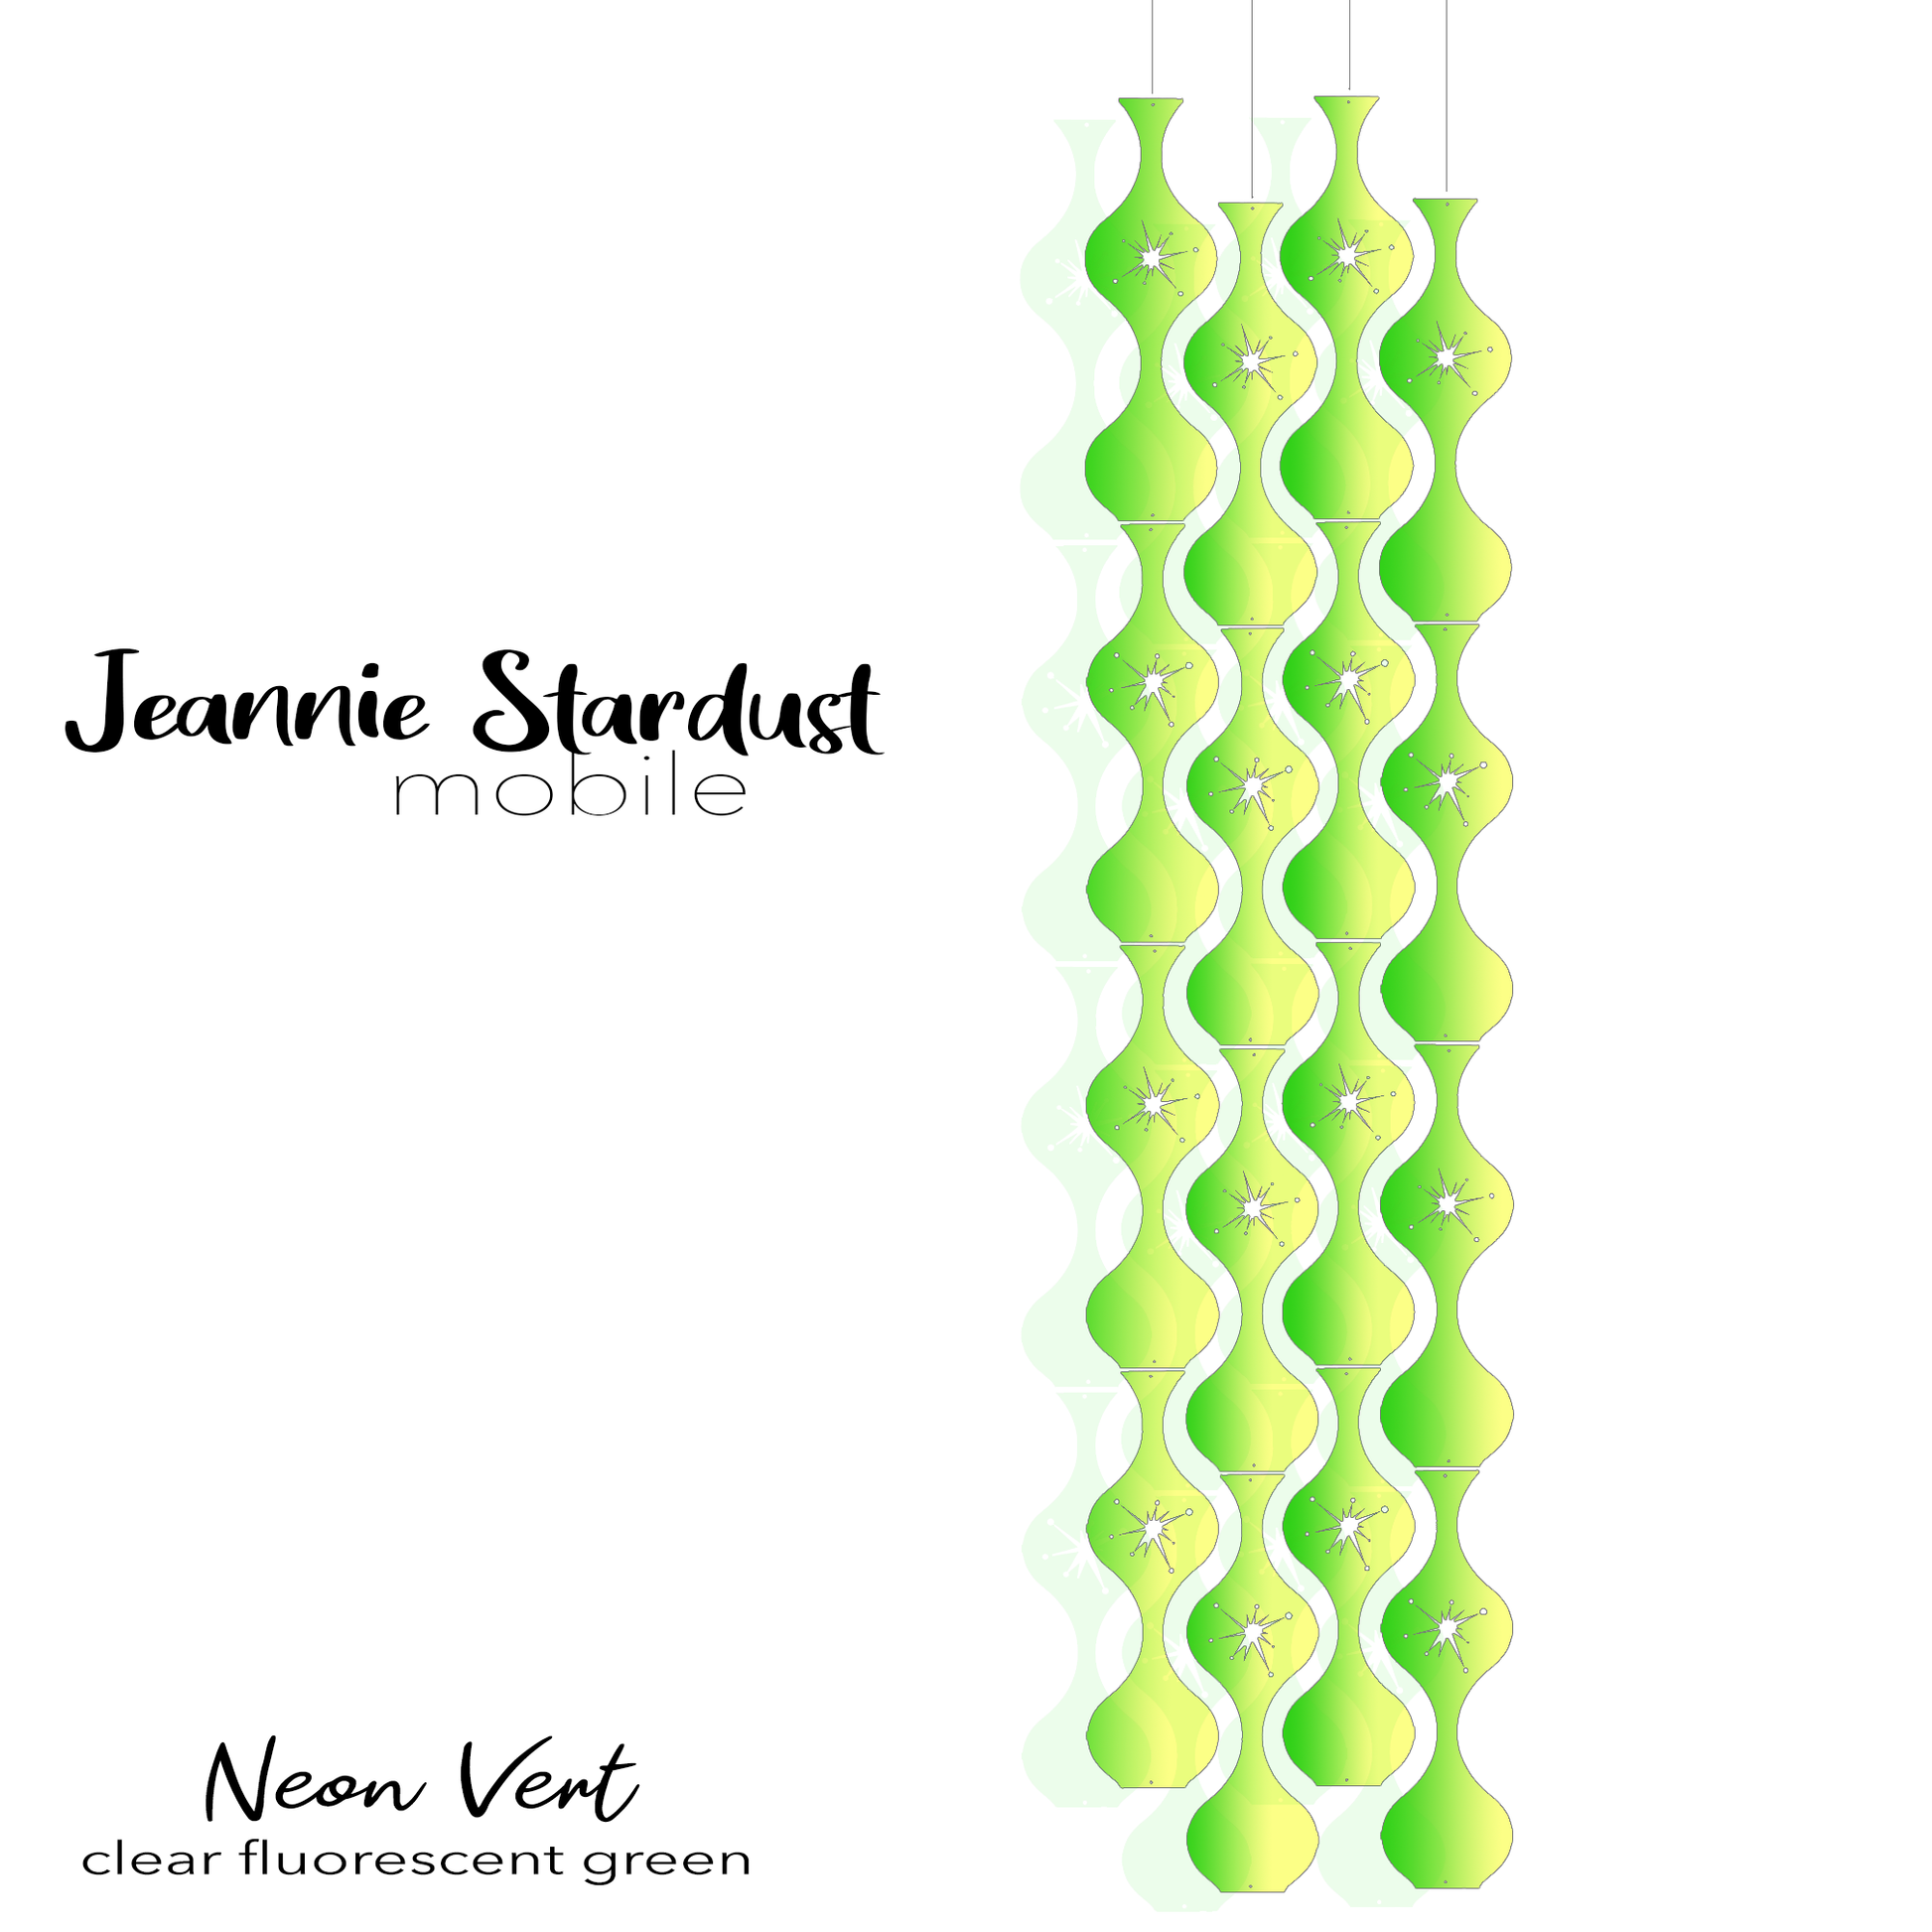 Fluorescent Jeannie Stardust DIY Kit in Neon Green / Yellow plexiglass acrylic - hanging art mobiles for mid century modern room decor by AtomicMobiles.com